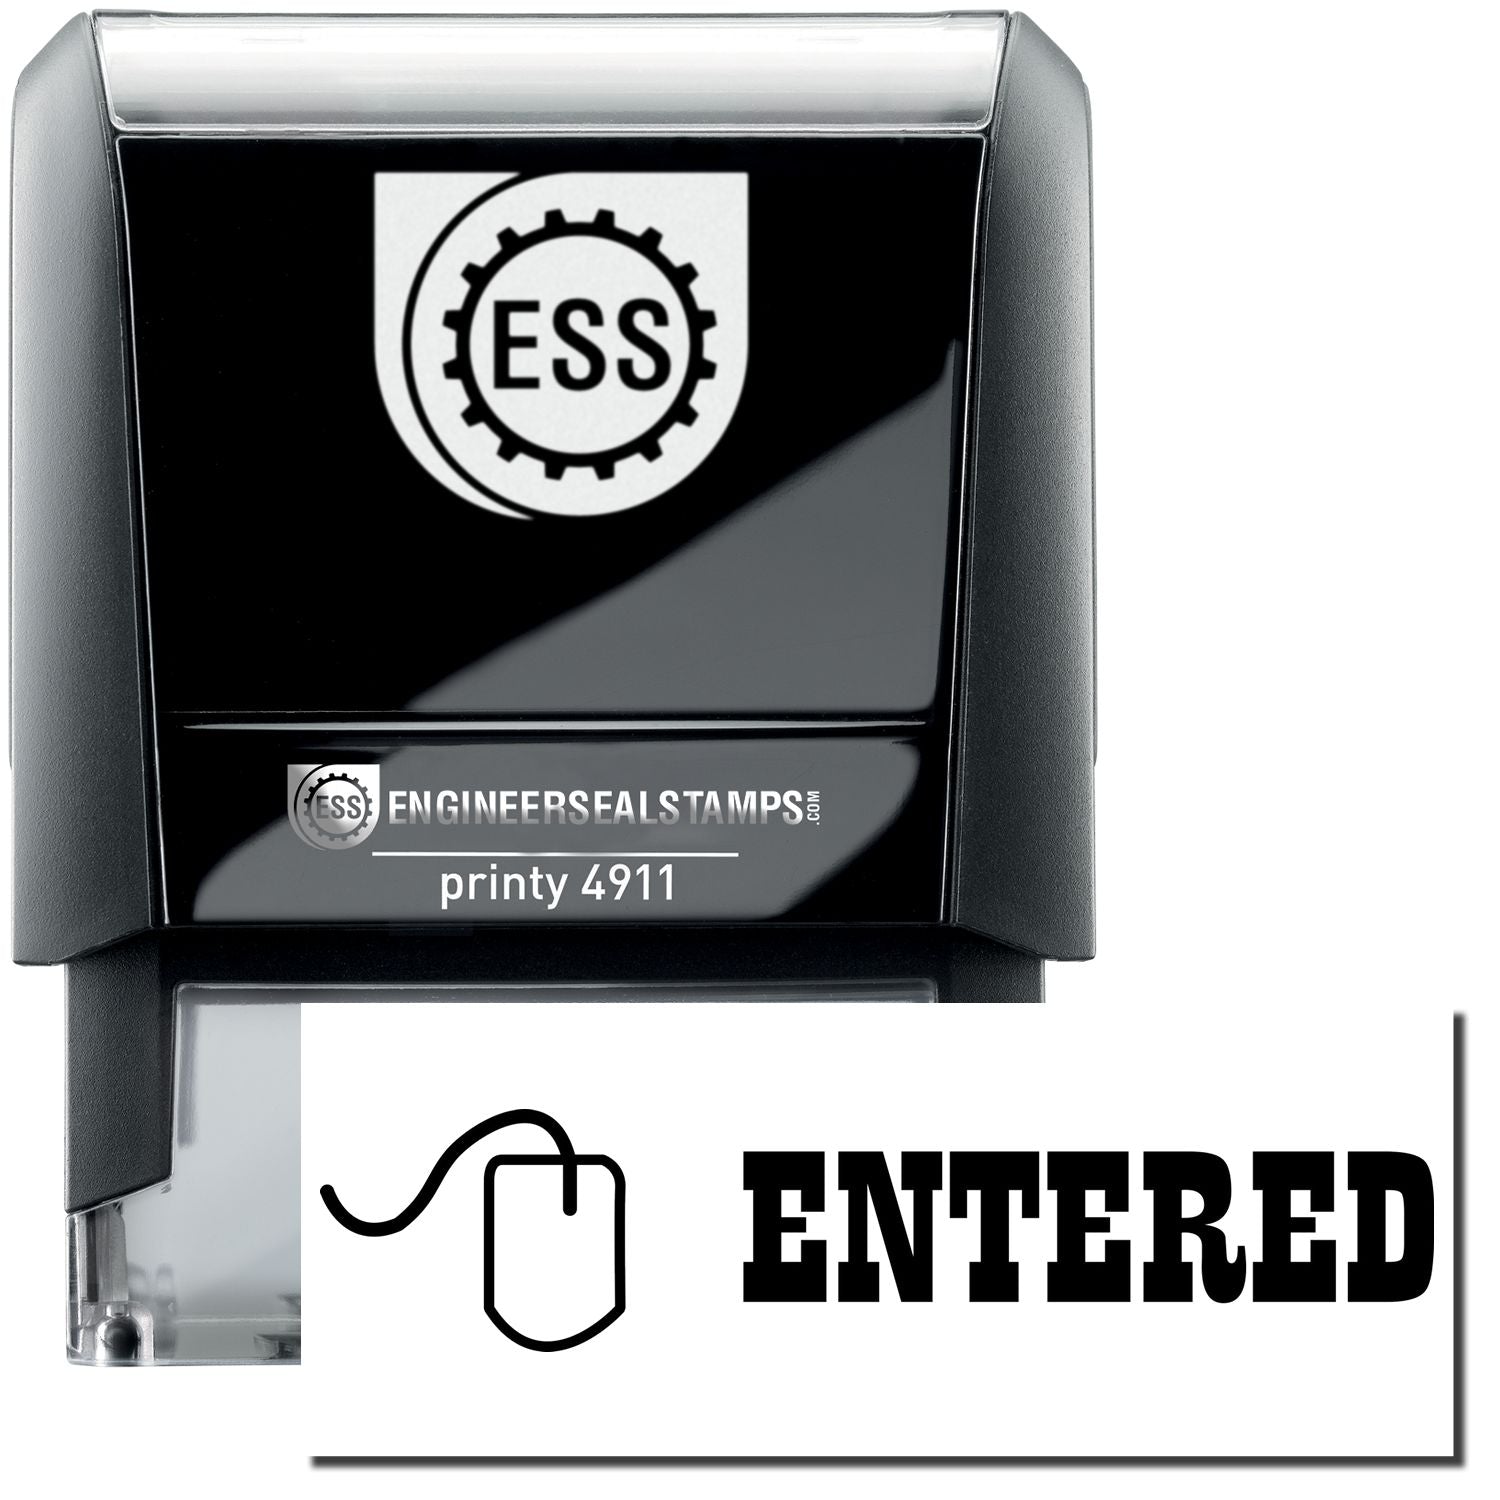 A self-inking stamp with a stamped image showing how the text "ENTERED" in a bright font and a small icon of a mouse on the left is displayed after stamping.